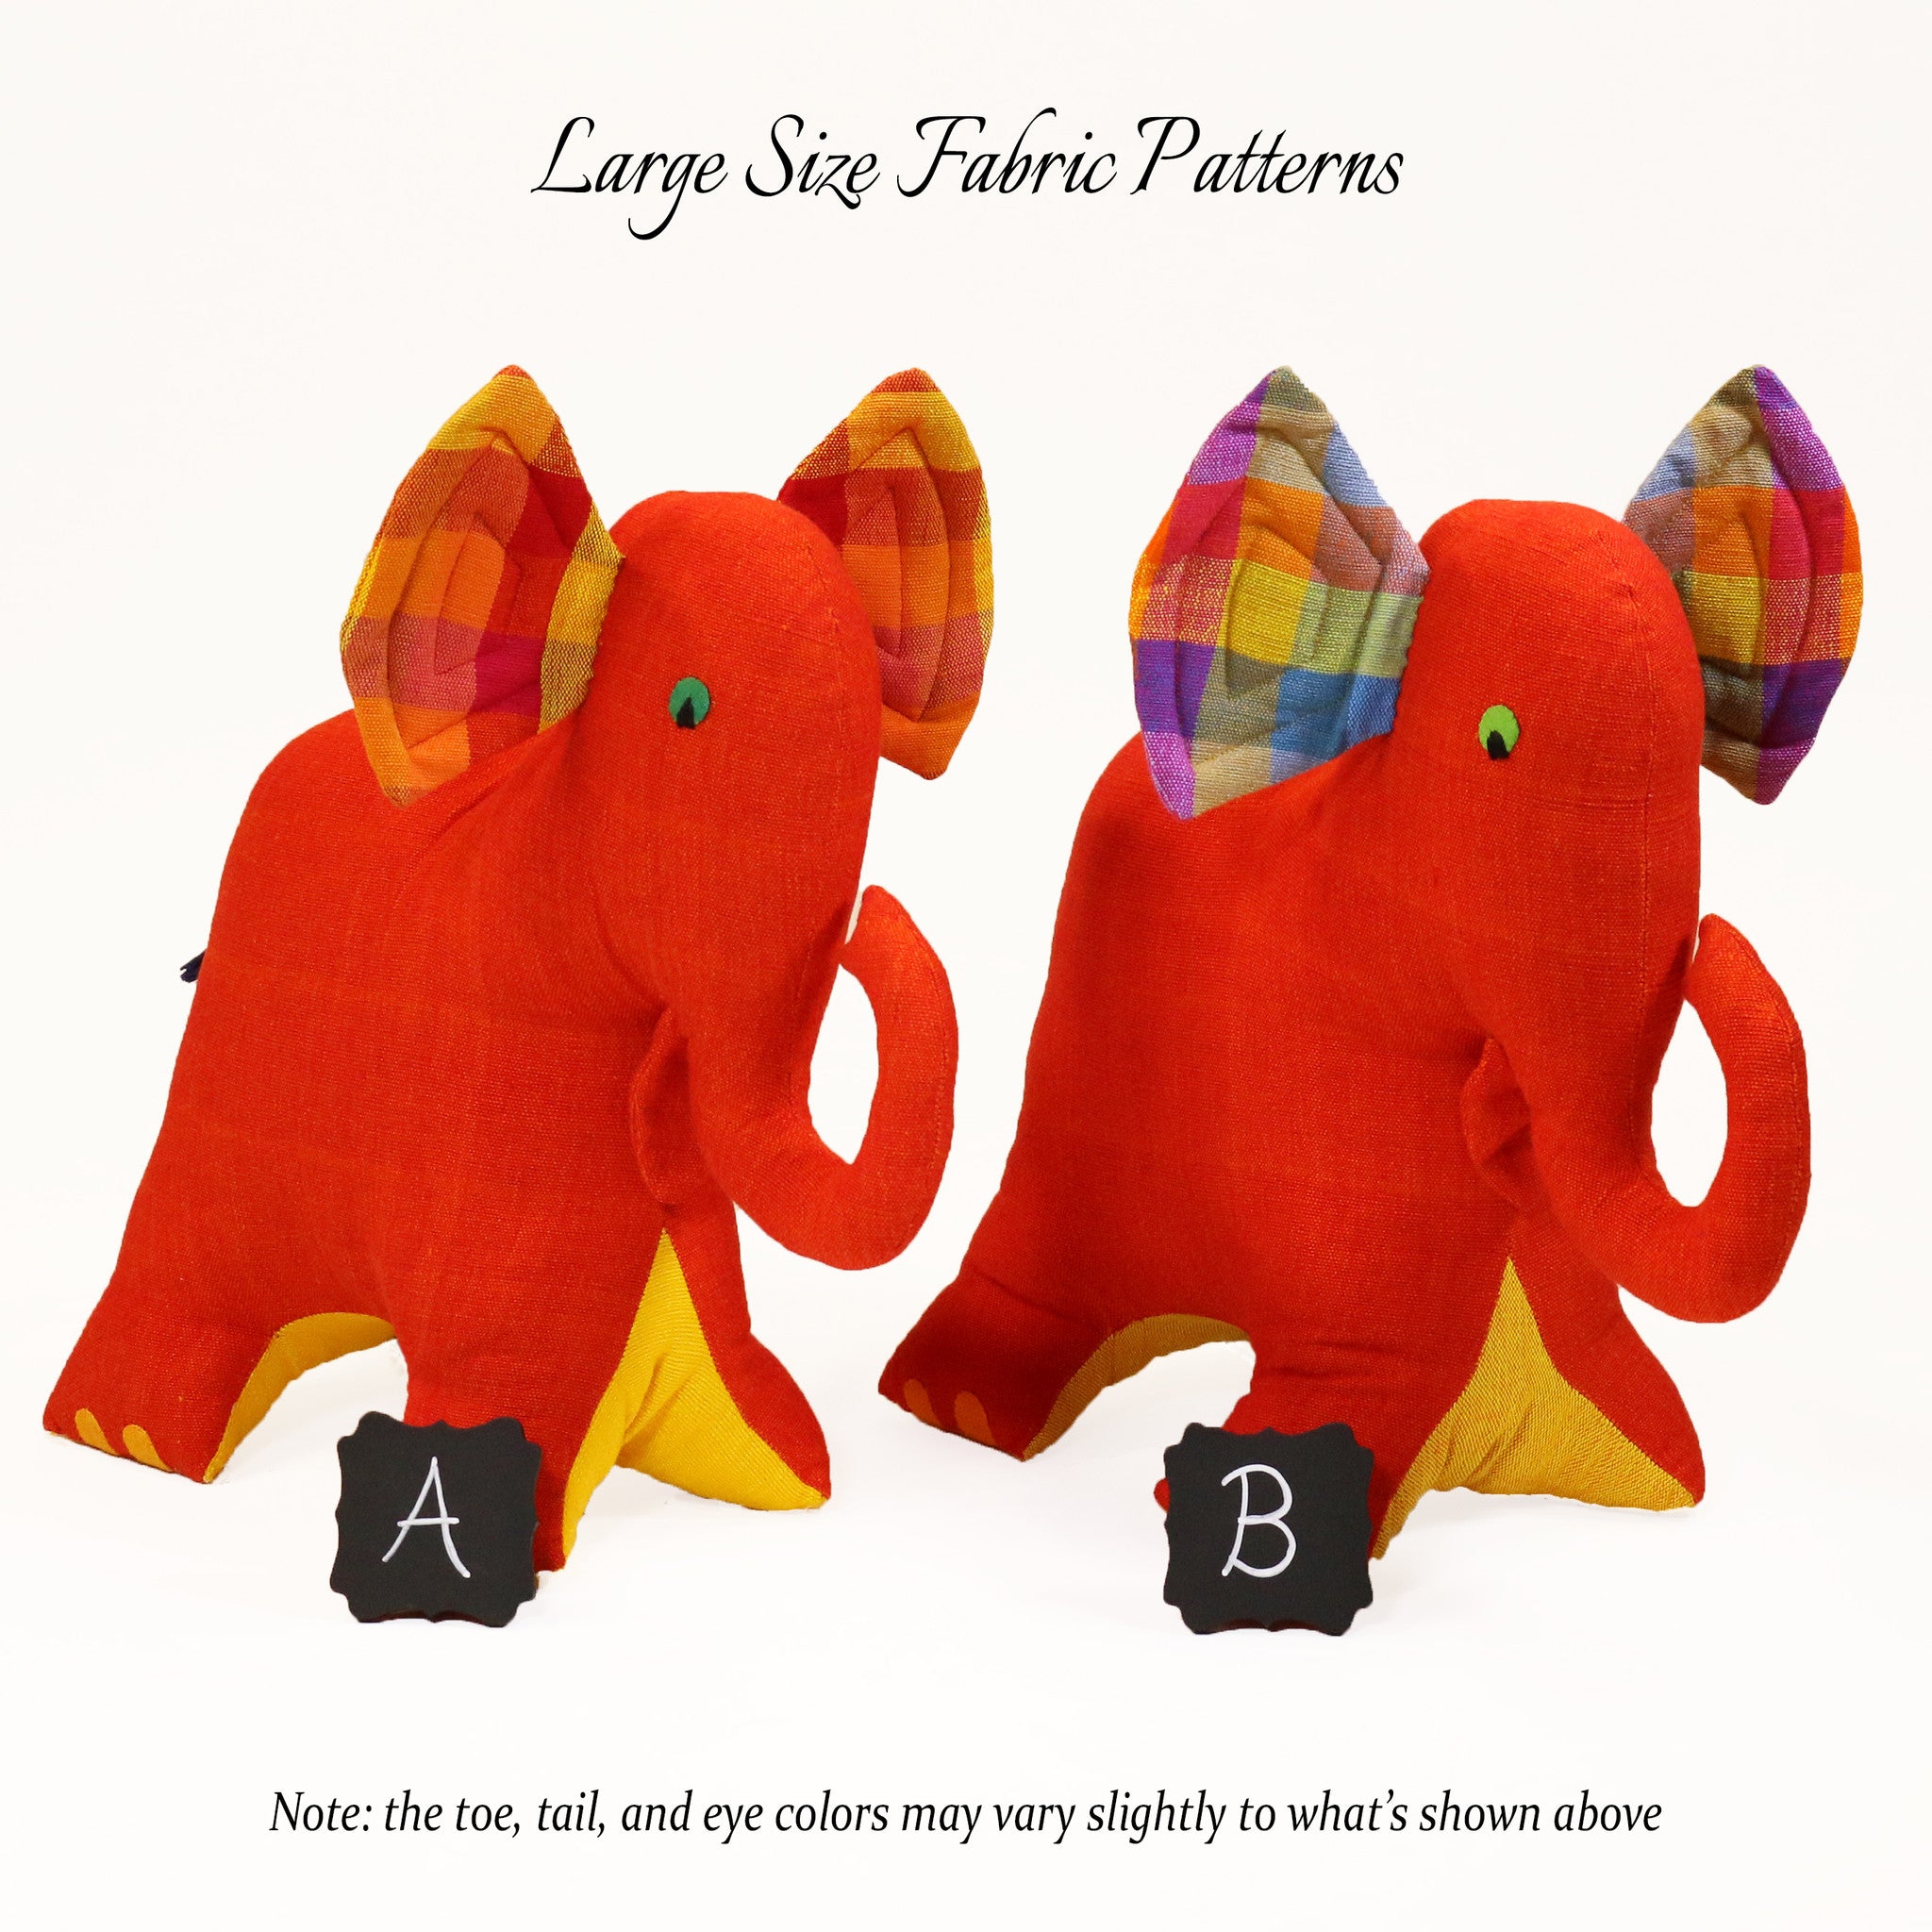 Eva, the Elephant – all large size fabric patterns shown